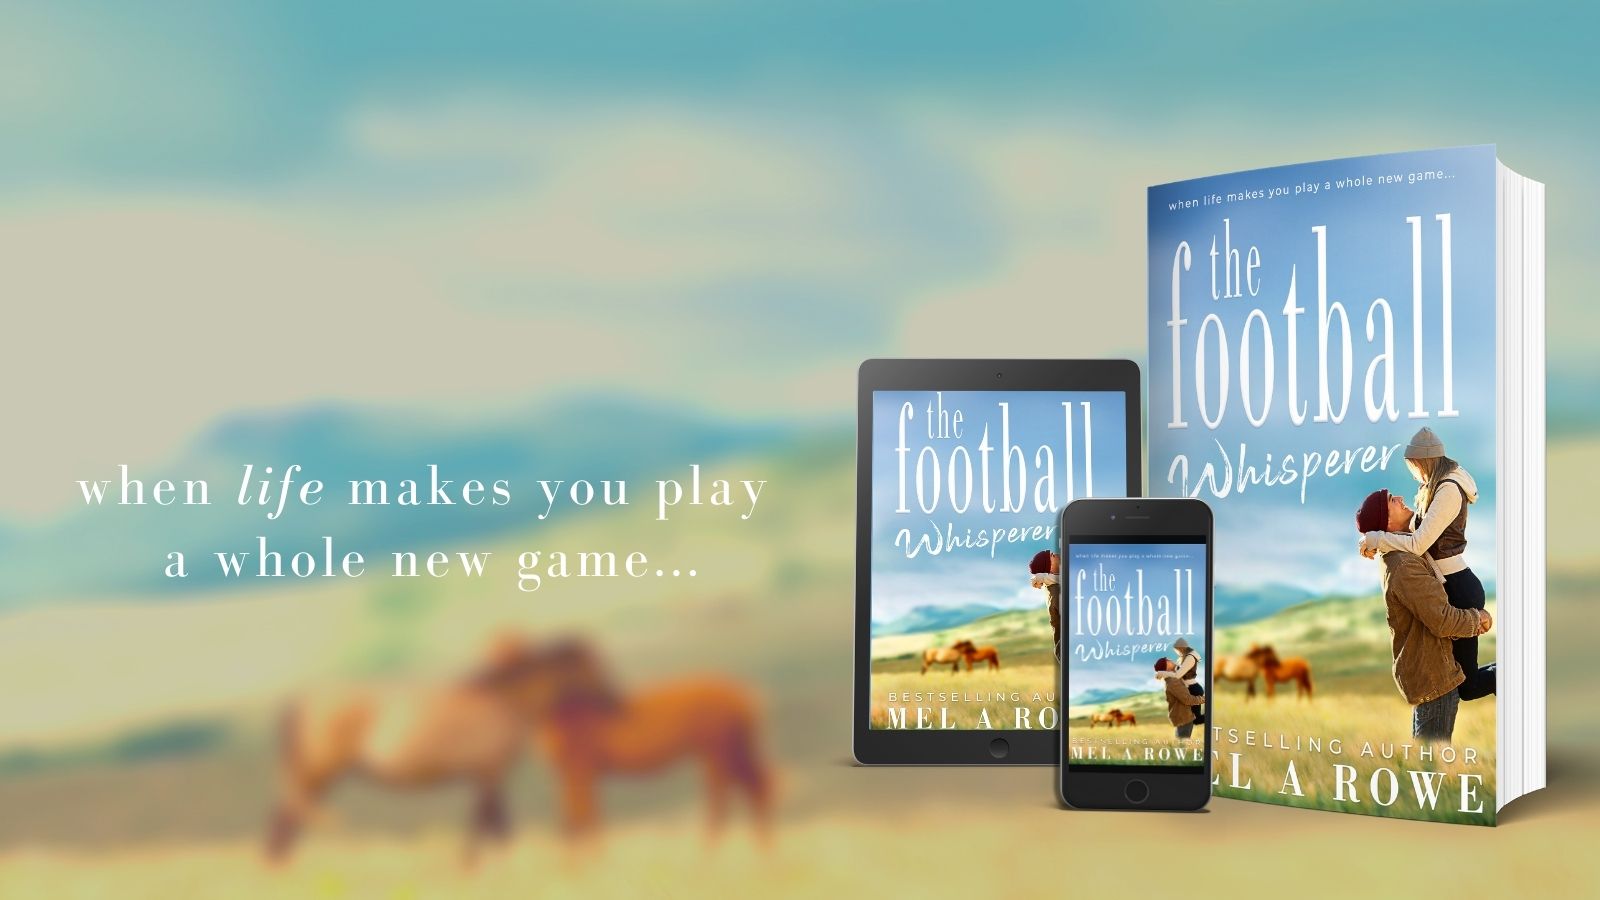 The Football Whisperer by Mel A ROWE